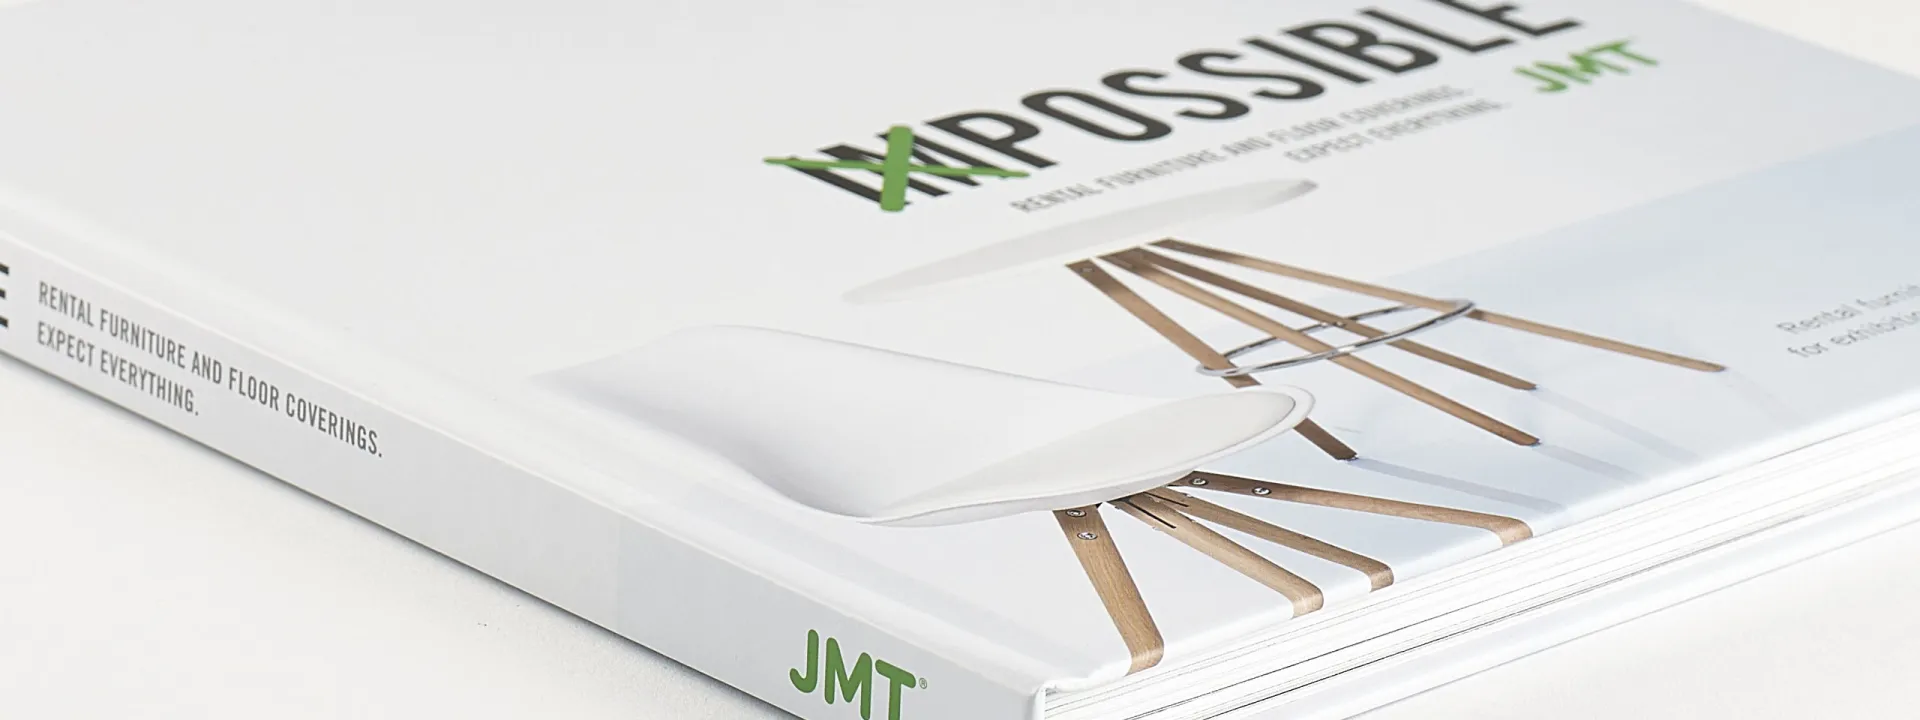 Catalogue design and production by MicroGraphix Graphic Design Agency